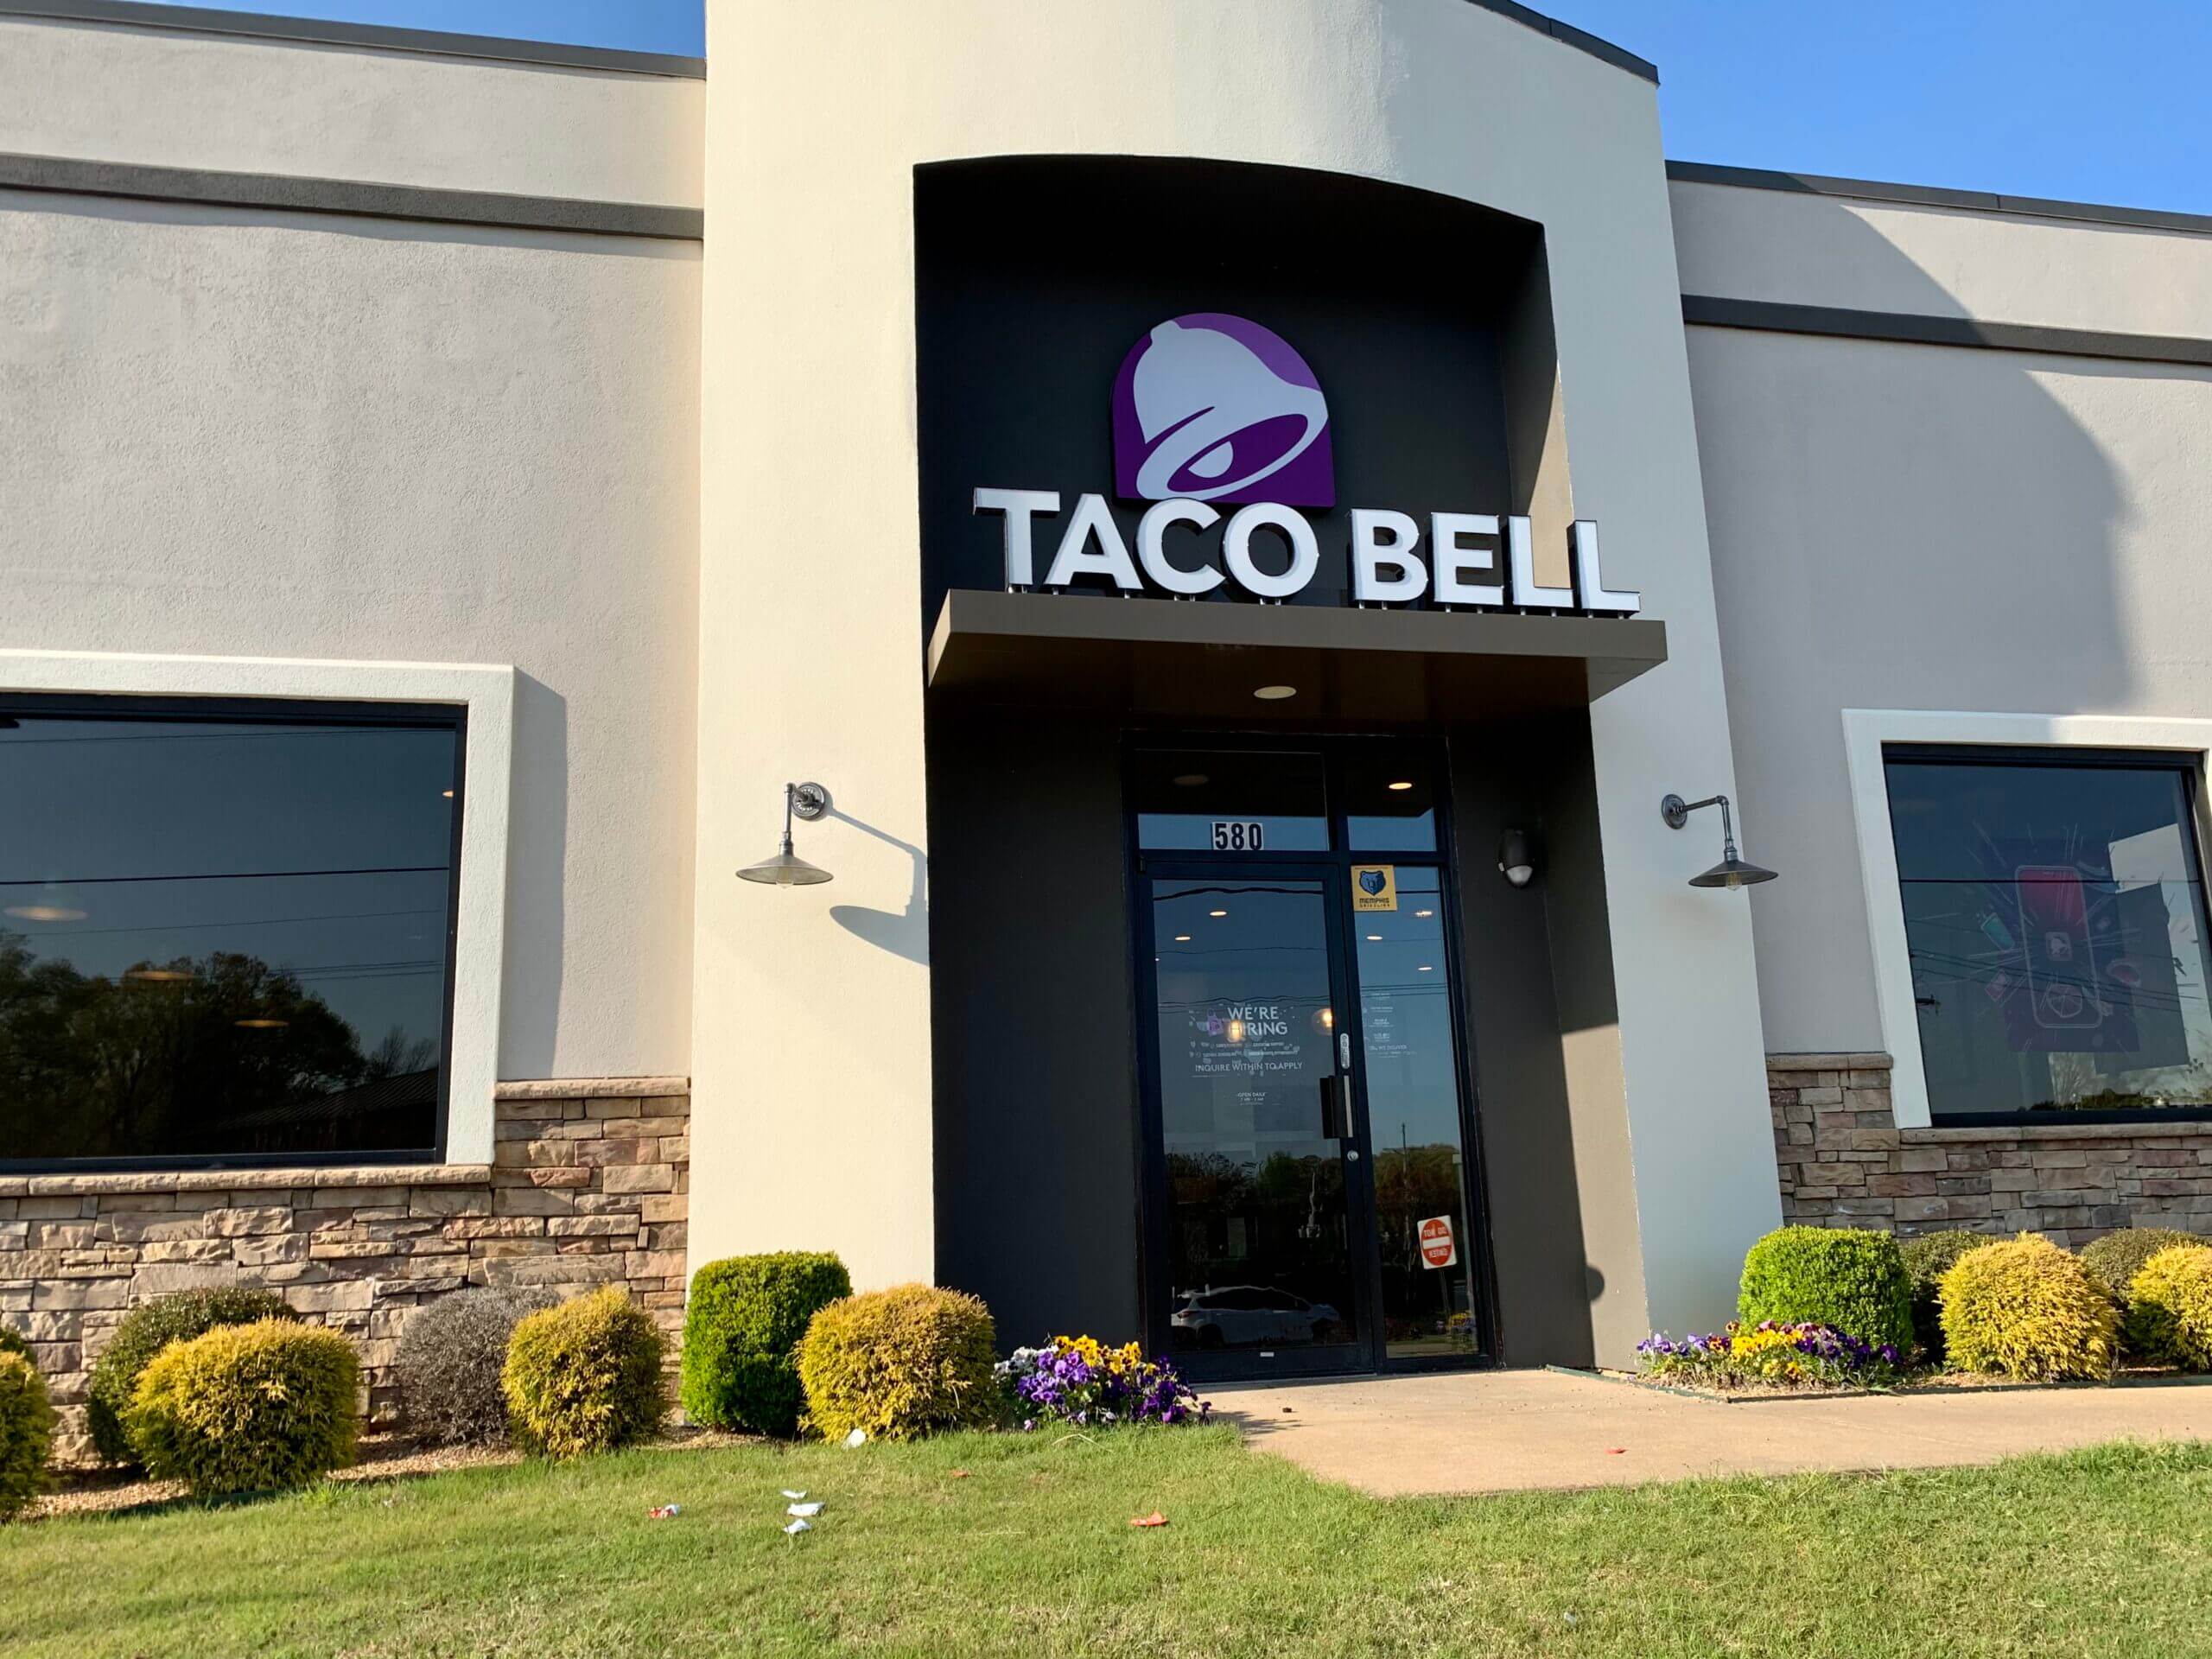 Bomb threat call made to Southaven Taco Bell, nothing found